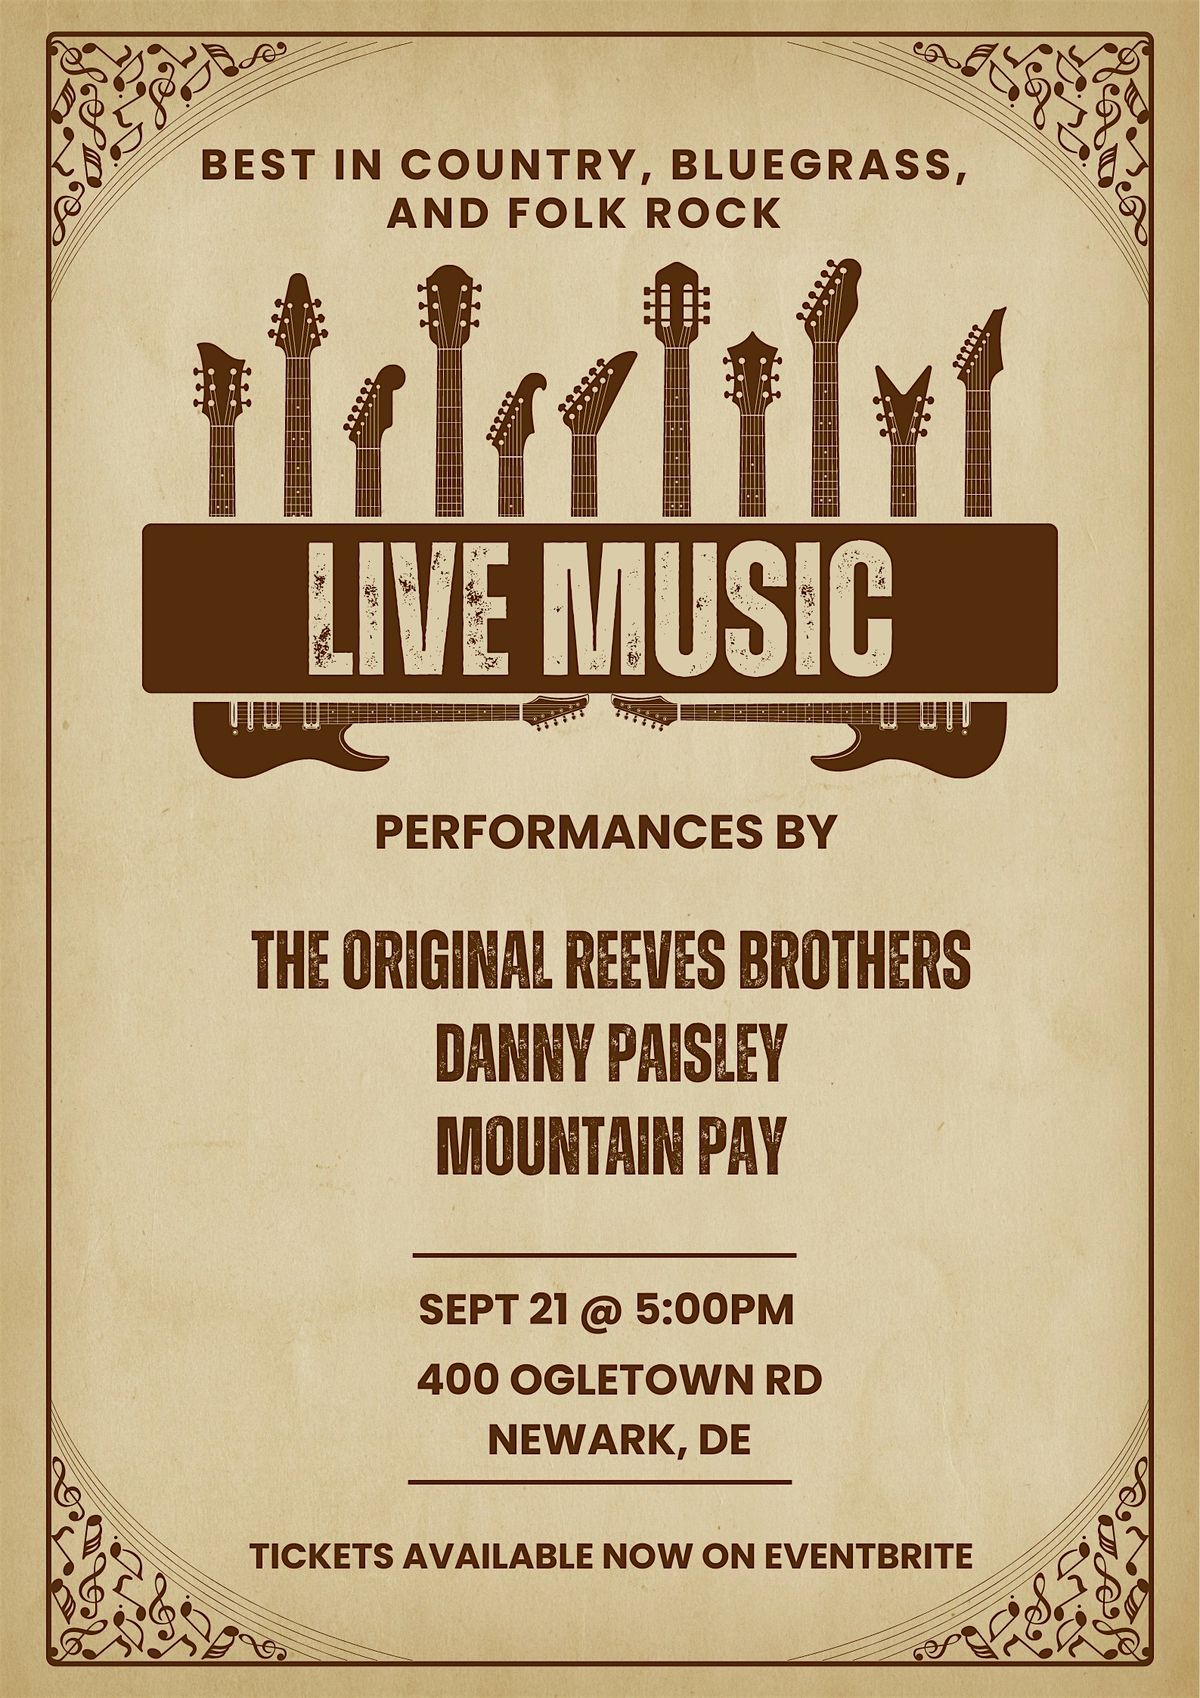 Danny Paisley and Southern Grass along with The Original Reeves Brothers and Mountain Pay